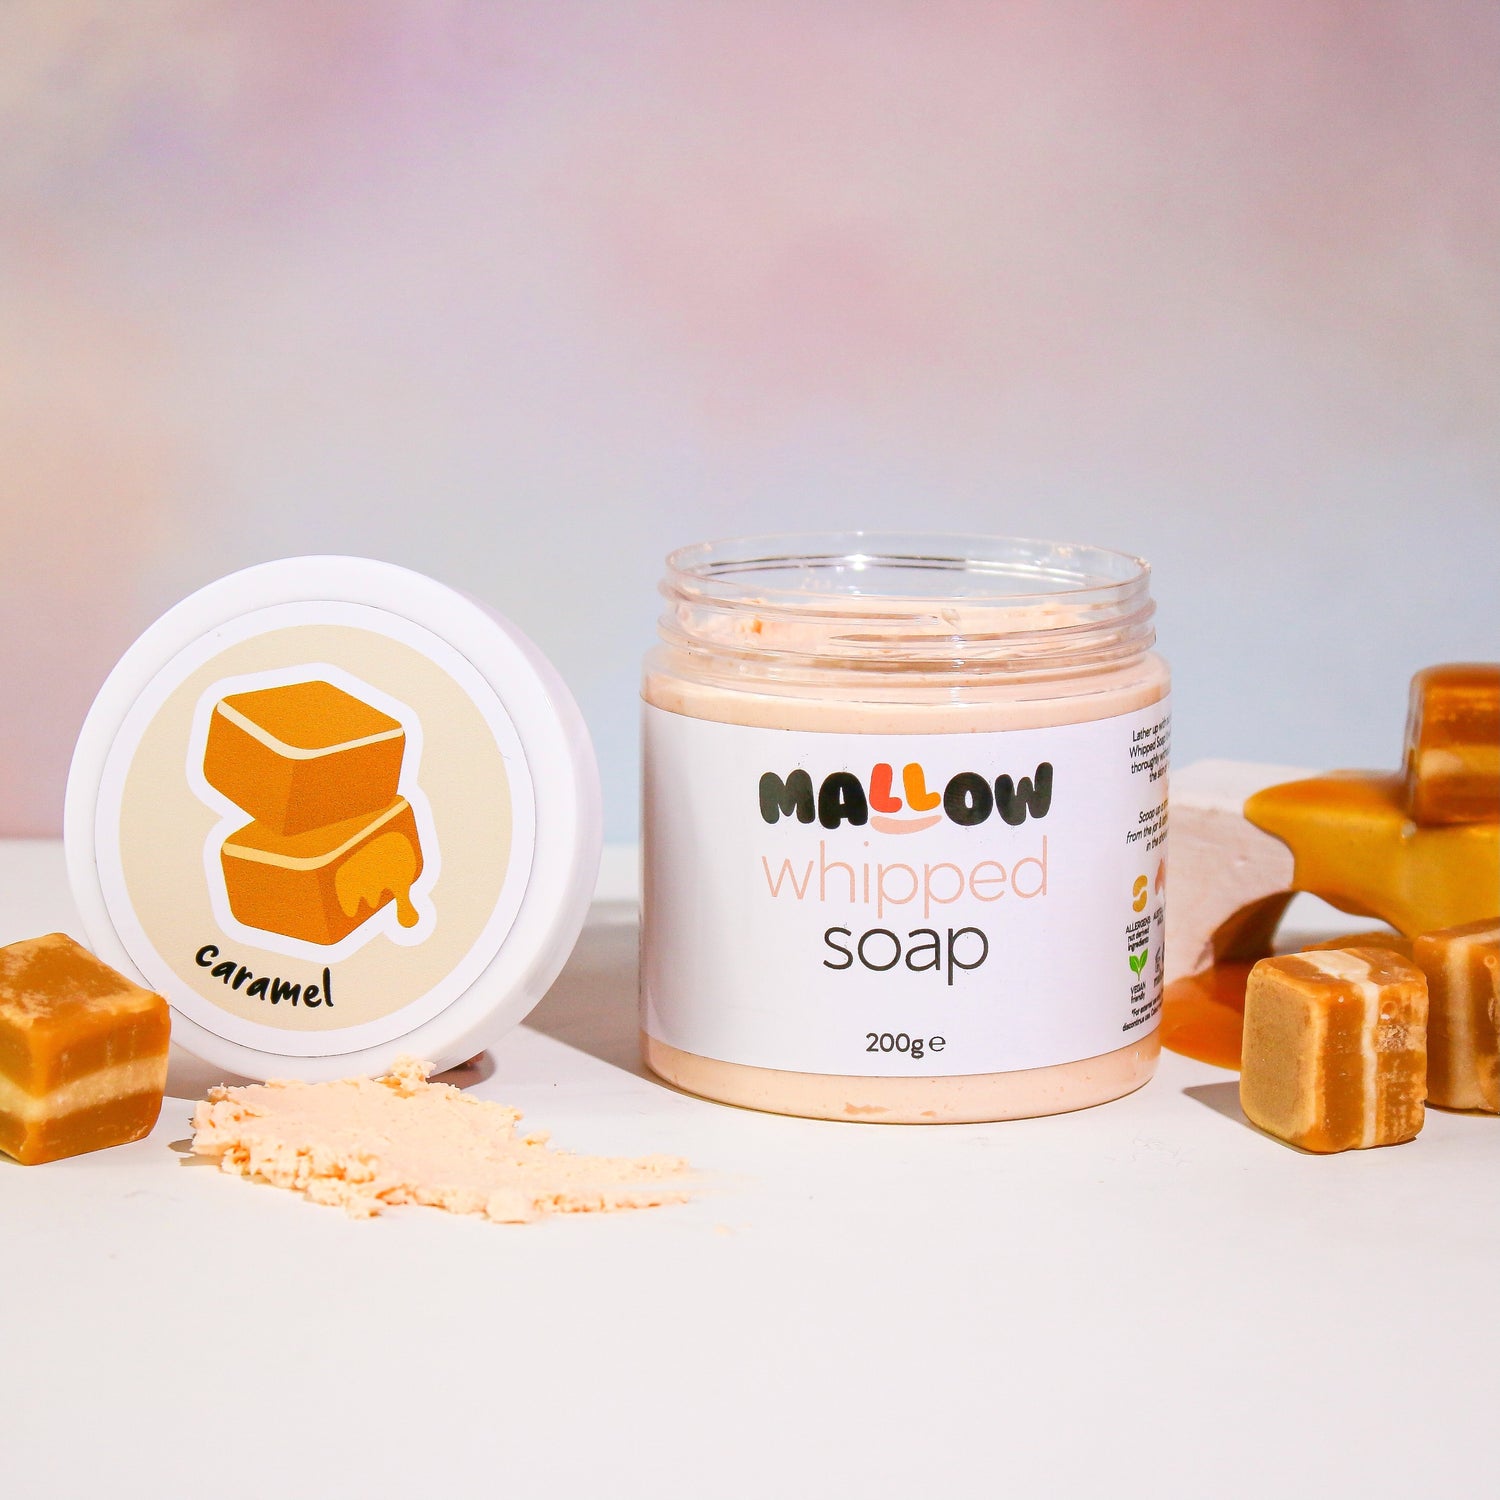 Mallow Whipped Soap